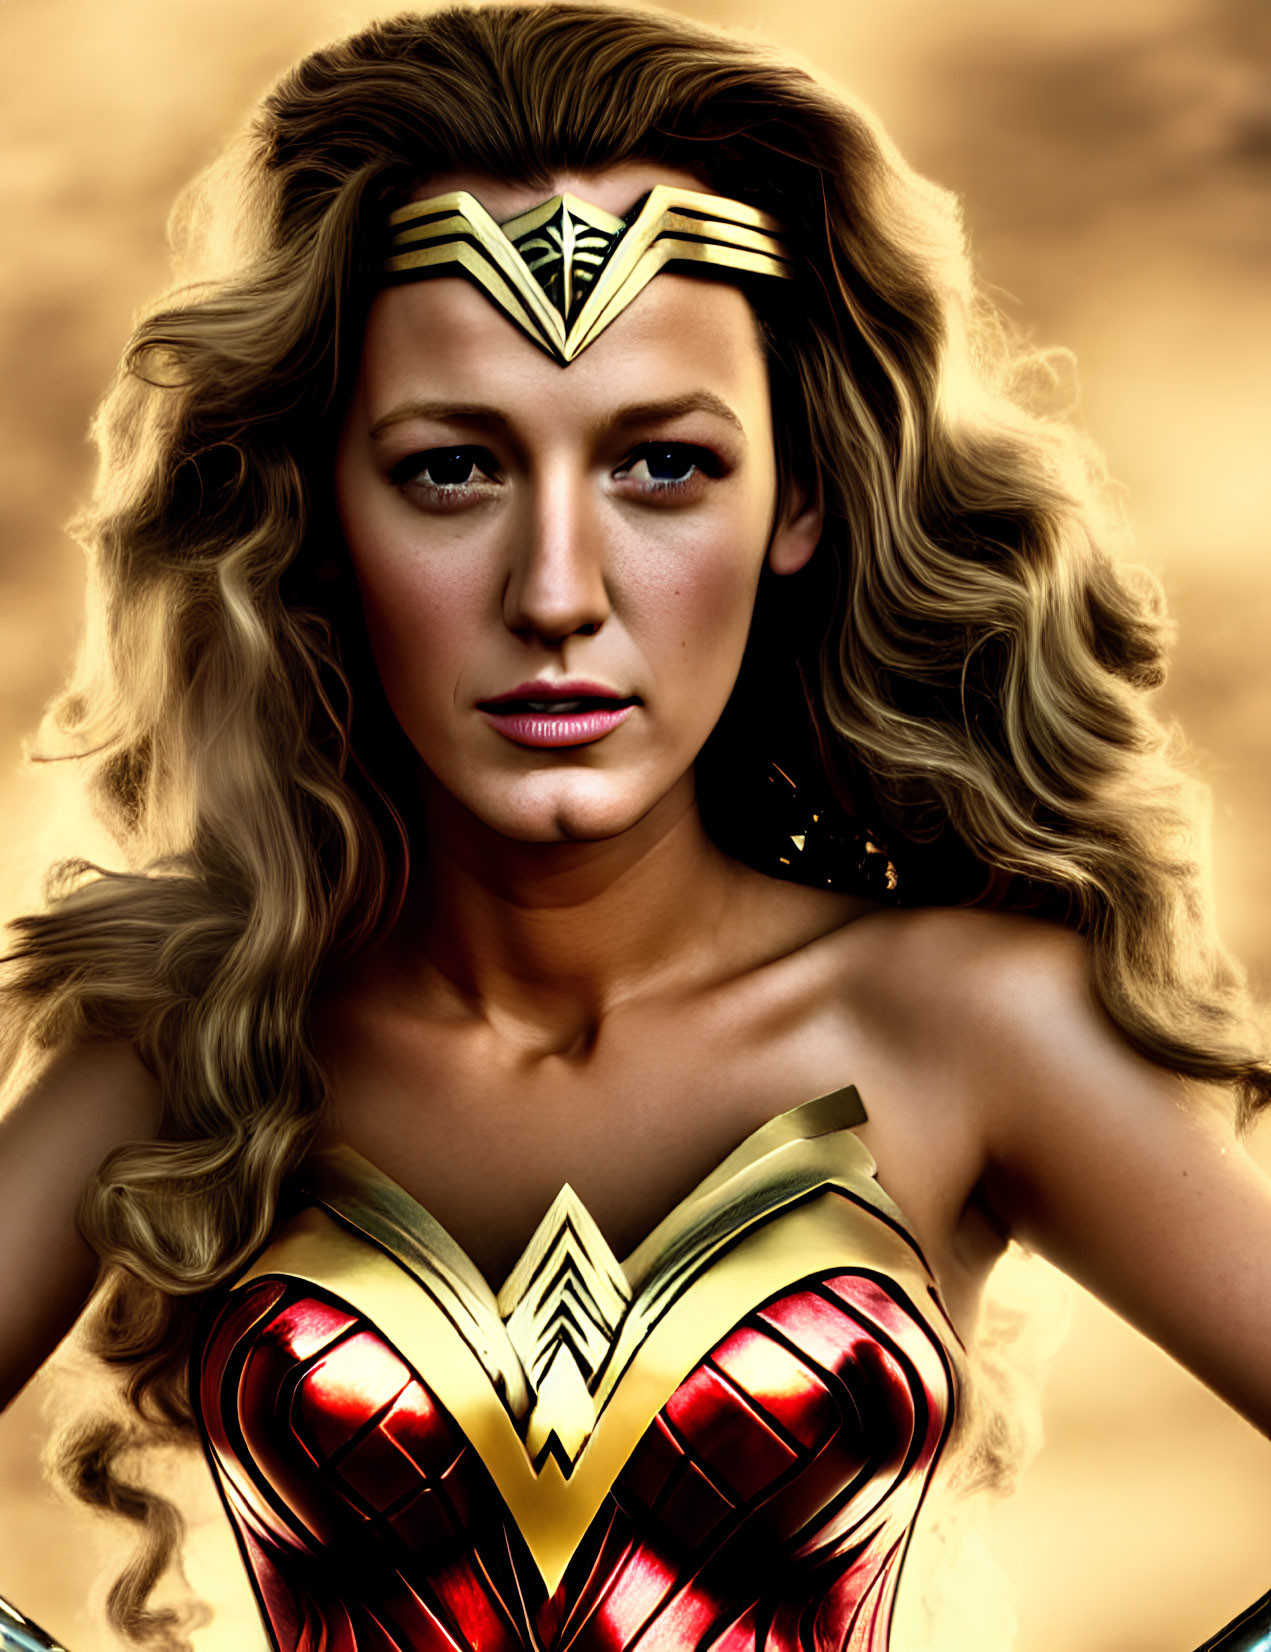 Long Curly-Haired Figure in Red and Gold Superhero Costume on Golden Background